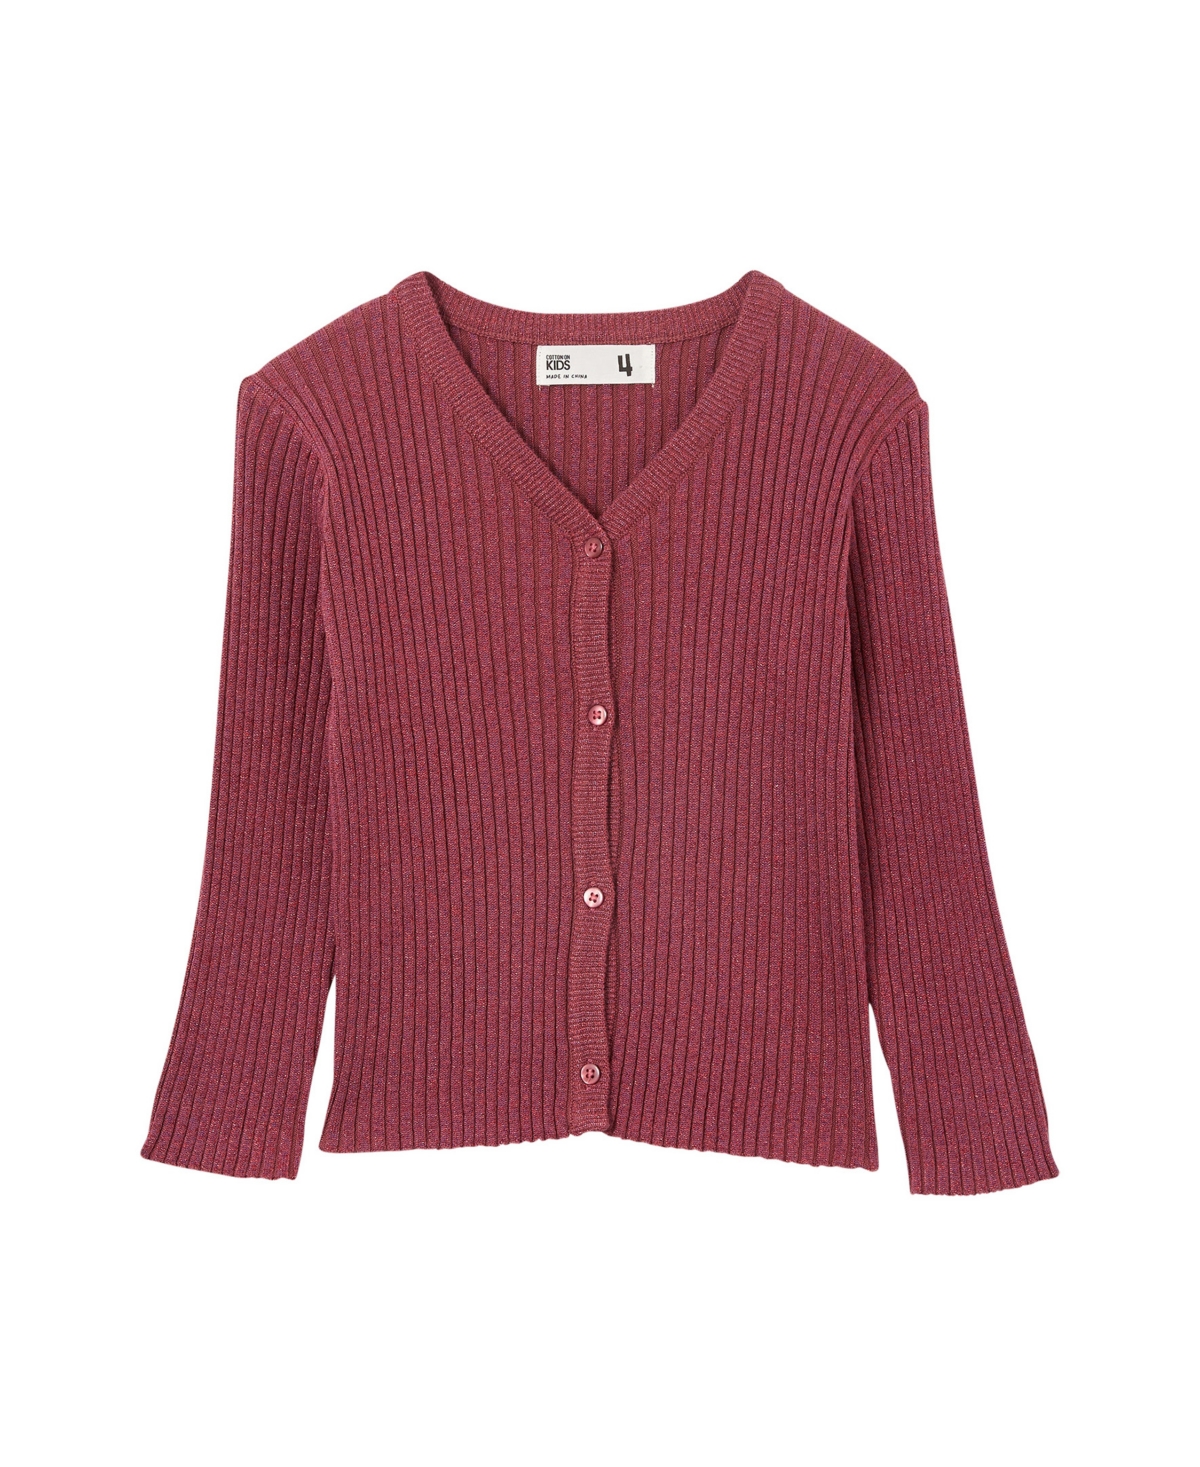 Cotton On Babies' Toddler Girls Molly Cardigan Sweater In Vintage Berry Sparkle